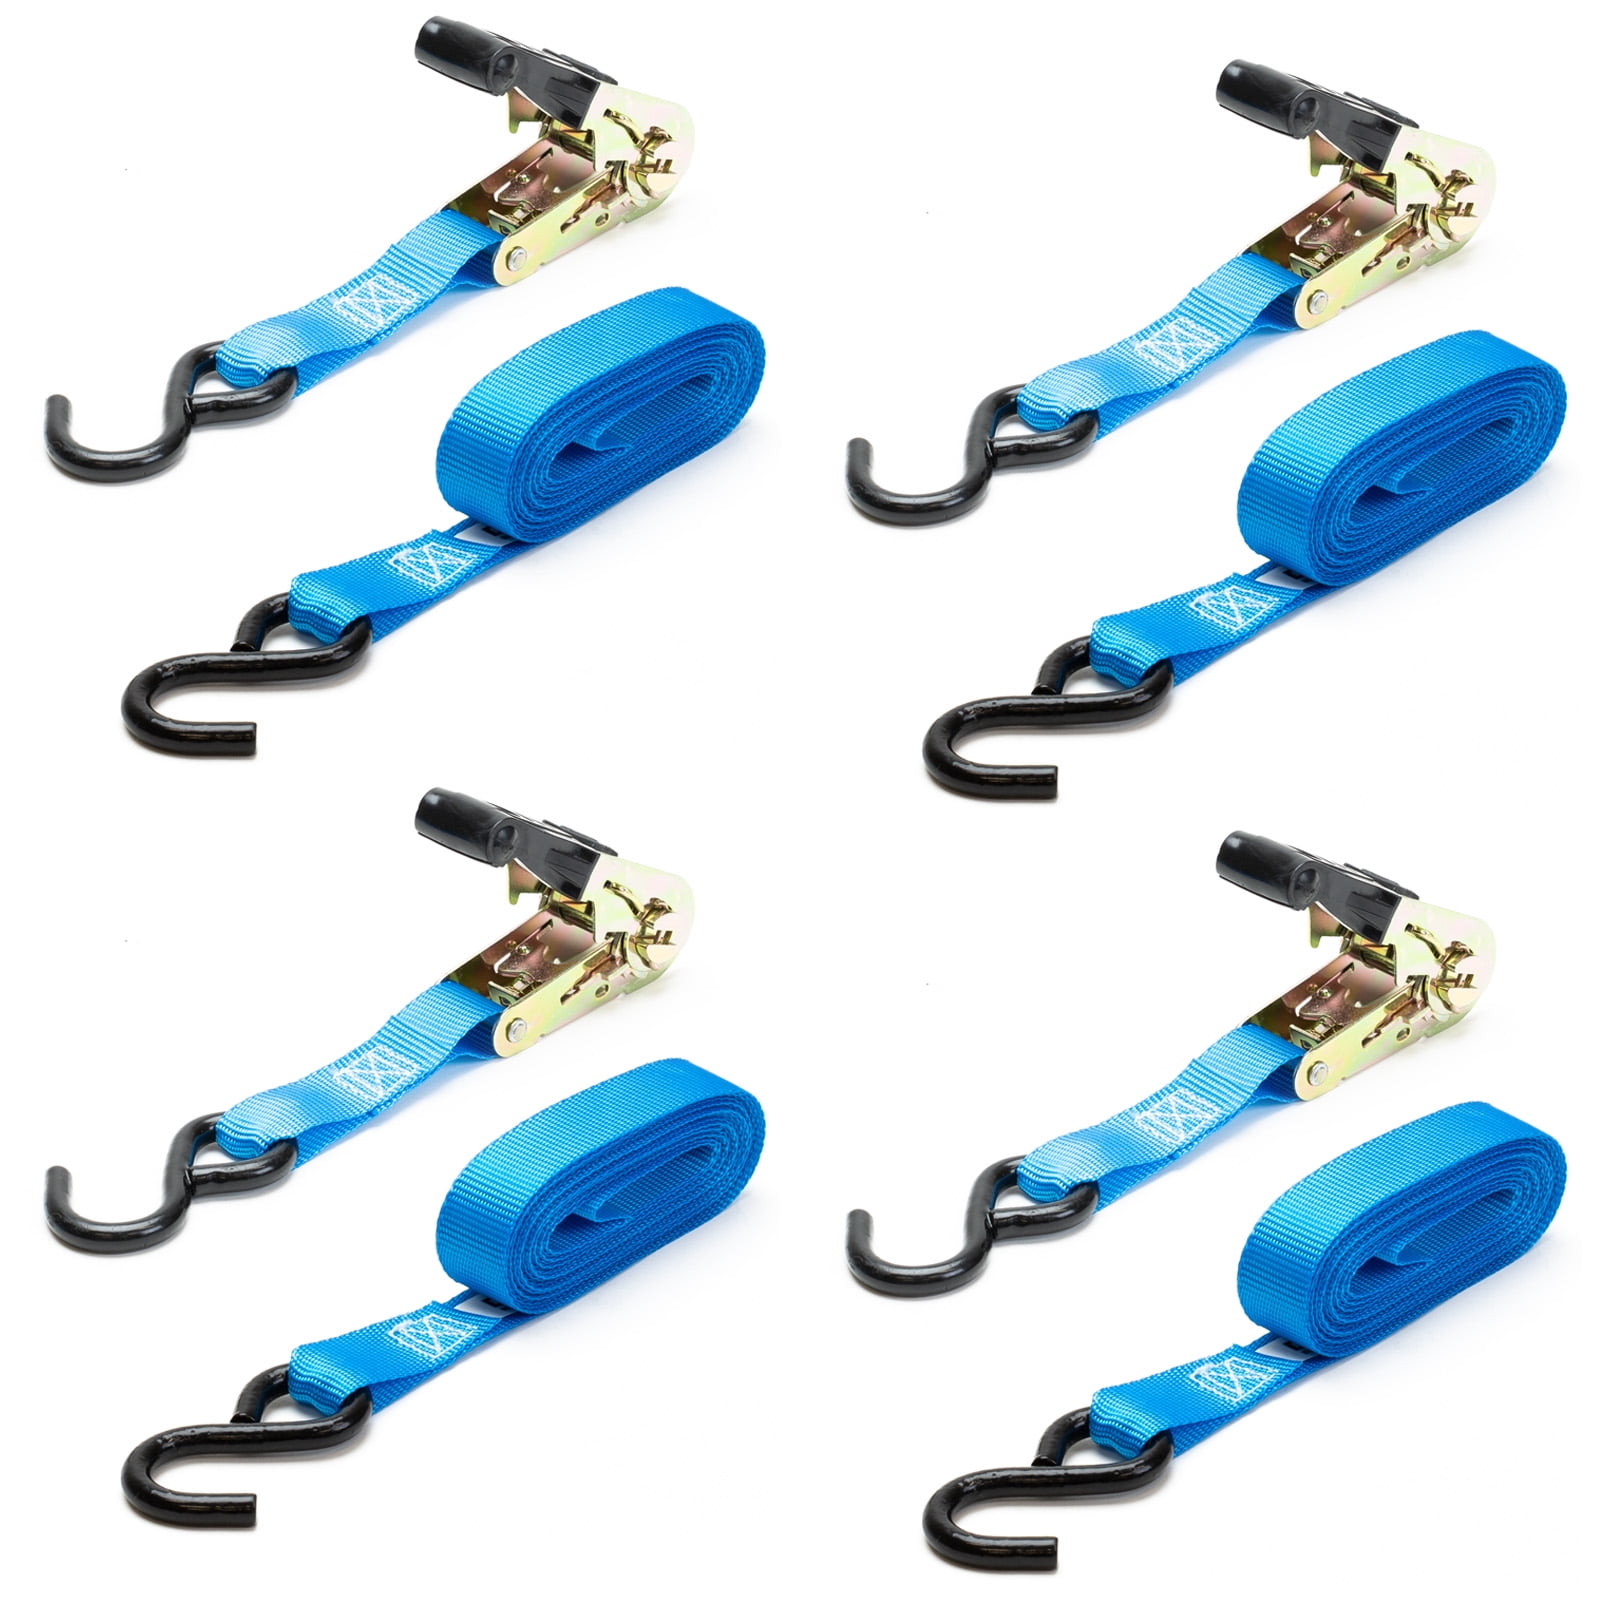 Details about   4 Pack Heavy Duty 1" x 15' Blue Ratchet Tie Down Strap for Car Truck SUV Trailer 